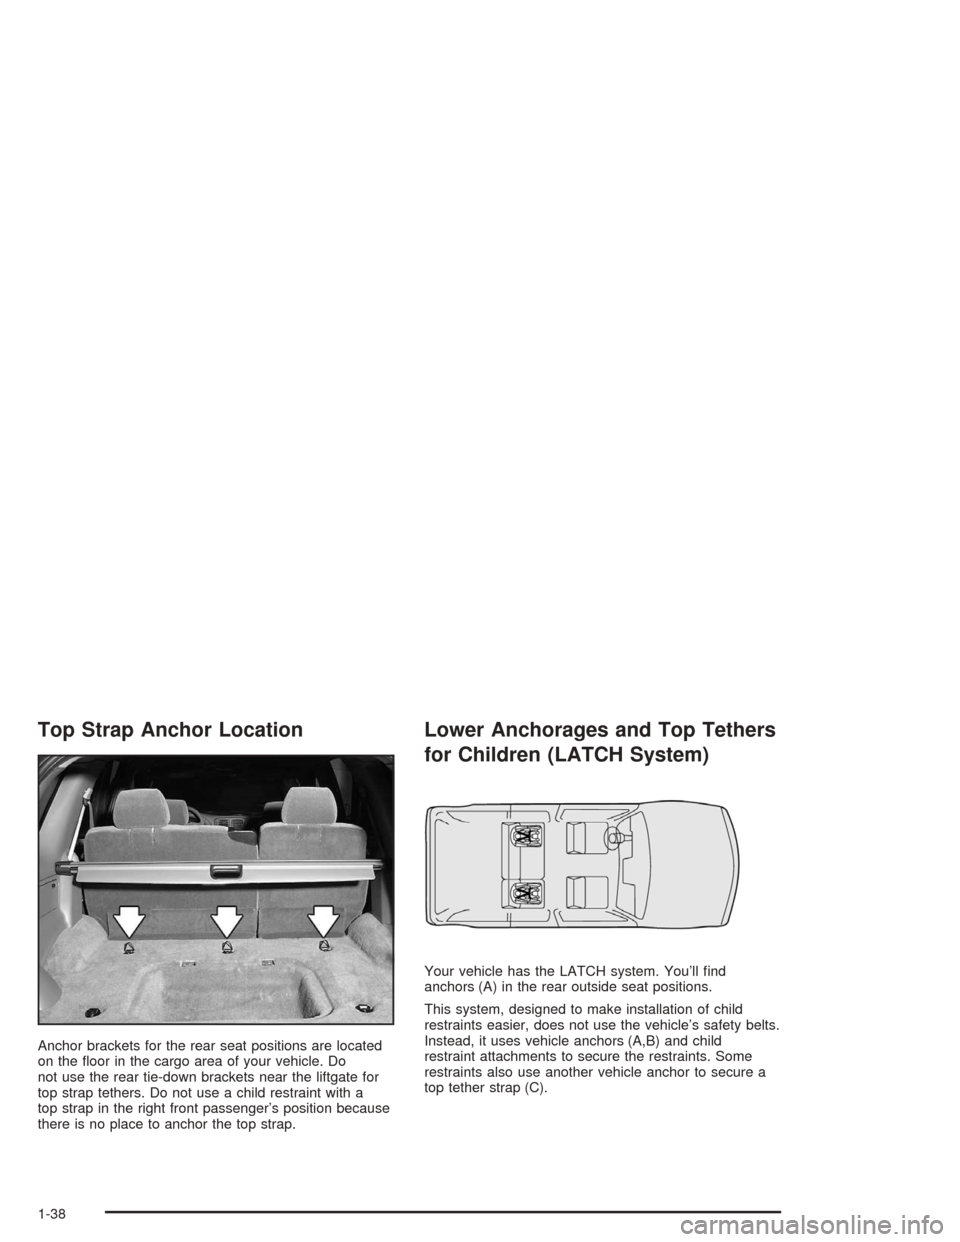 Oldsmobile Bravada 2004  s Service Manual Top Strap Anchor Location
Anchor brackets for the rear seat positions are located
on the �oor in the cargo area of your vehicle. Do
not use the rear tie-down brackets near the liftgate for
top strap t